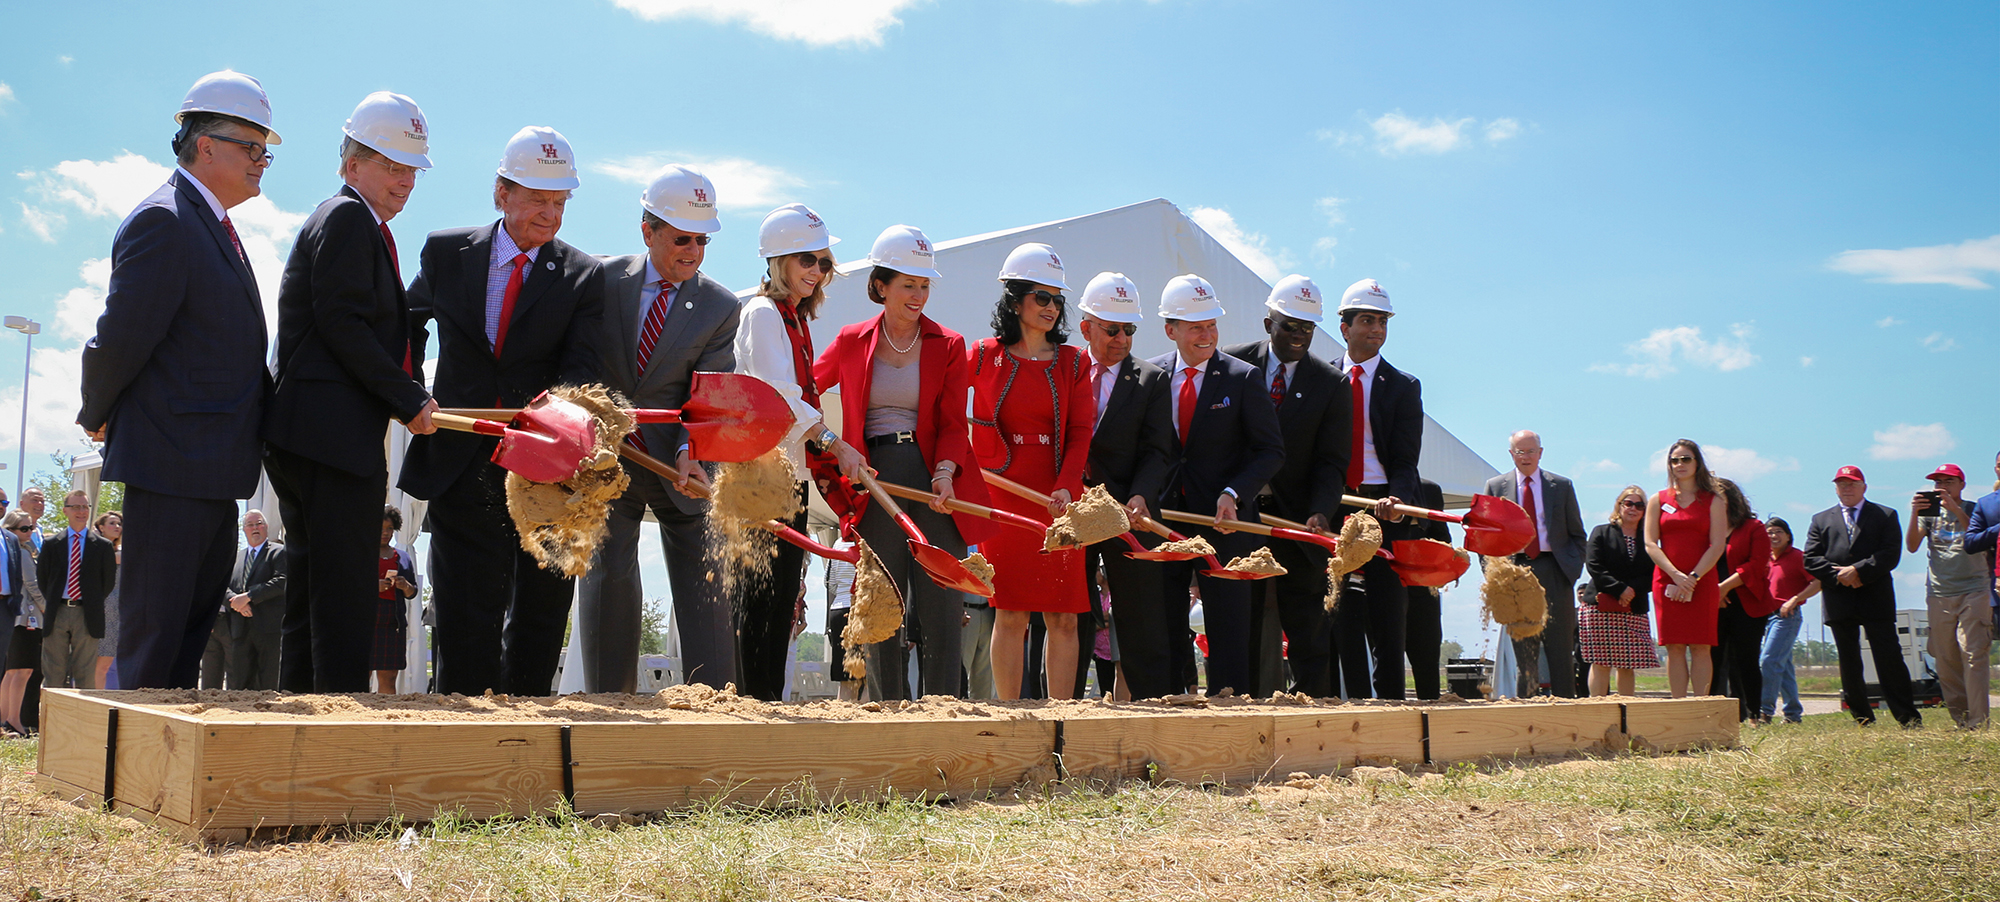 Group of people with shovels at a groundbreaking ceremony